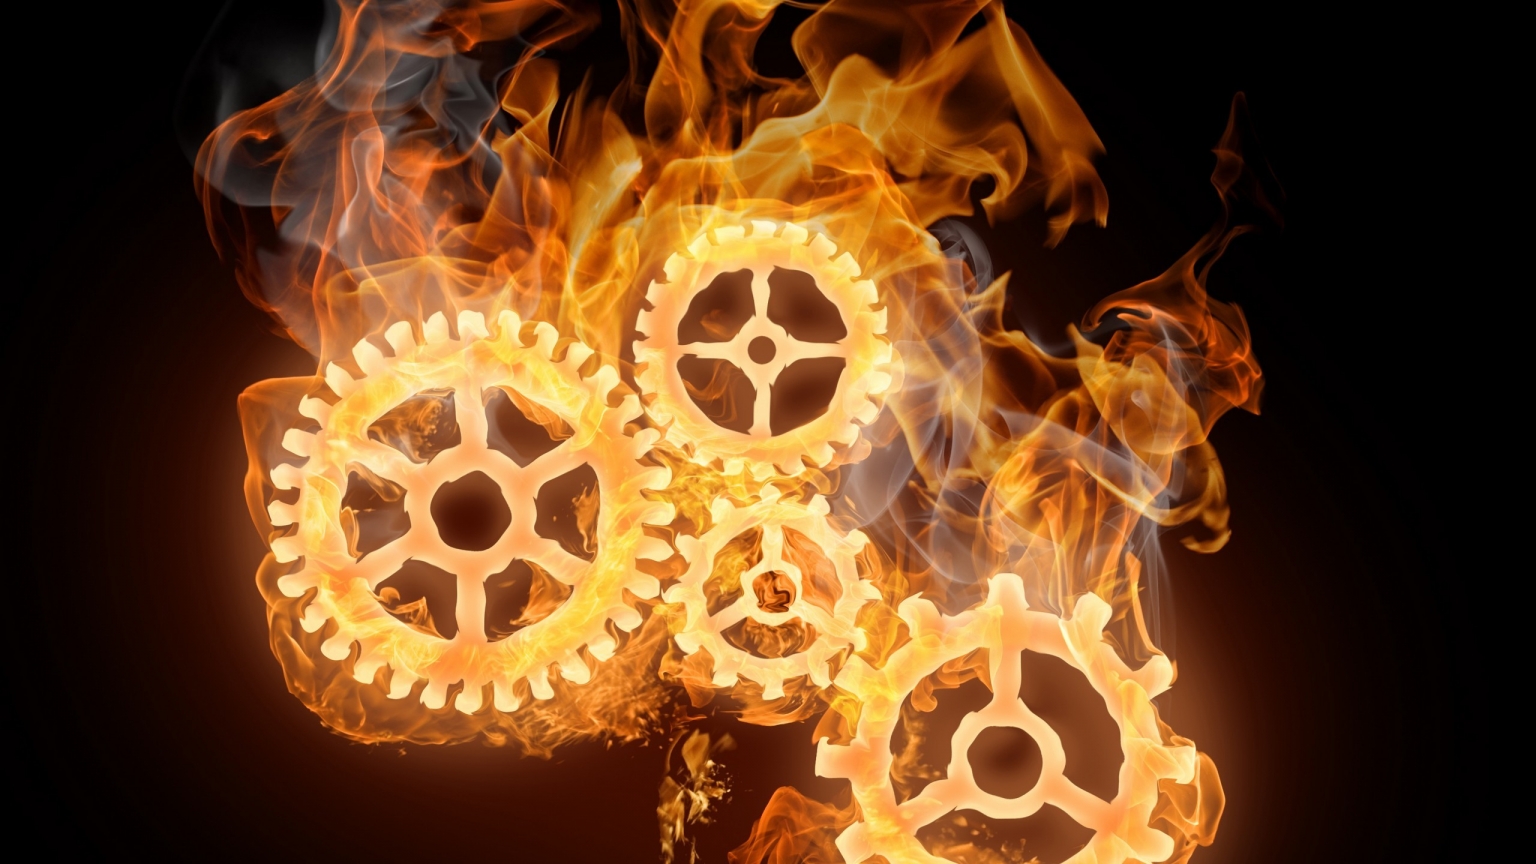 Wheels on Fire for 1536 x 864 HDTV resolution